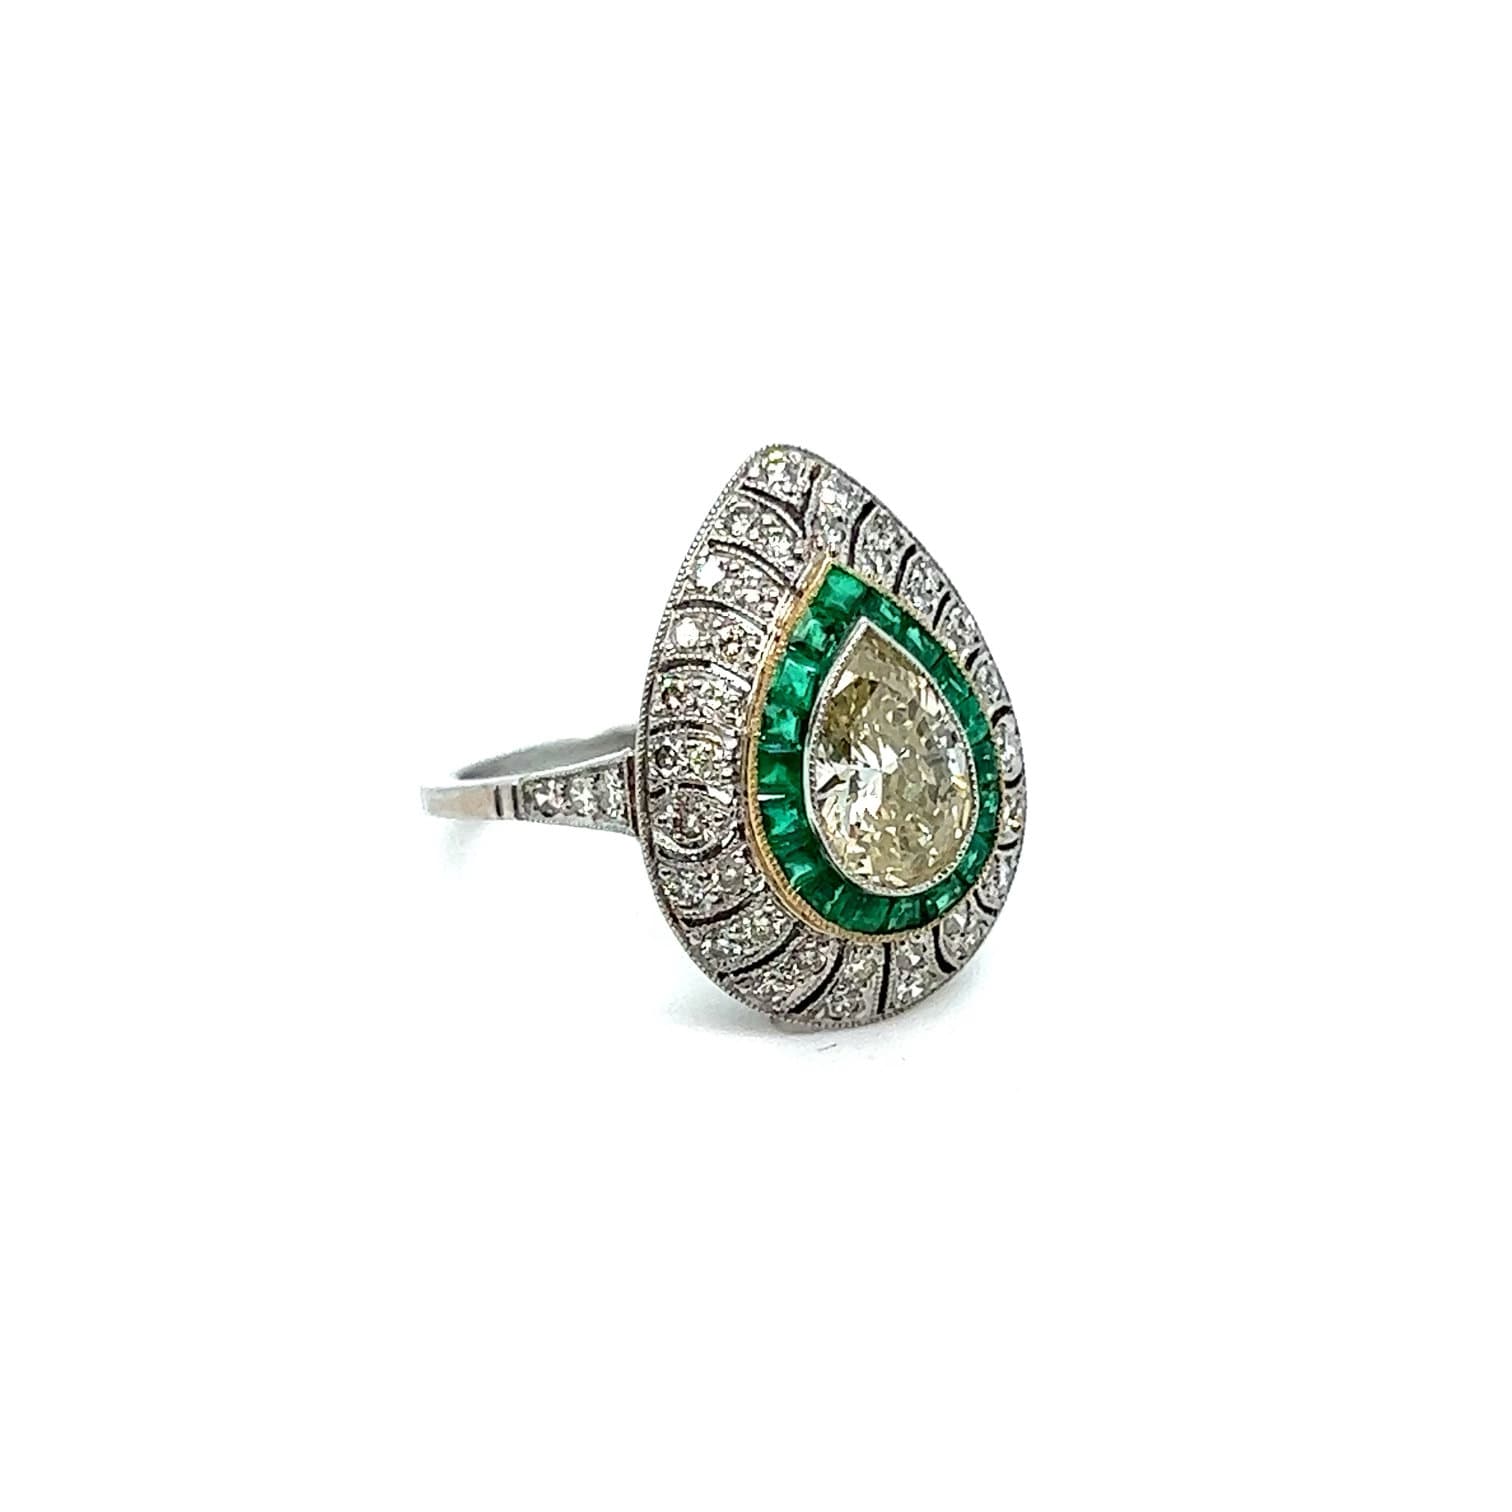 Stunning Pear Cut Diamond and Emerald Halo Ring Engagement Ring in Platinum - 2.45ct.